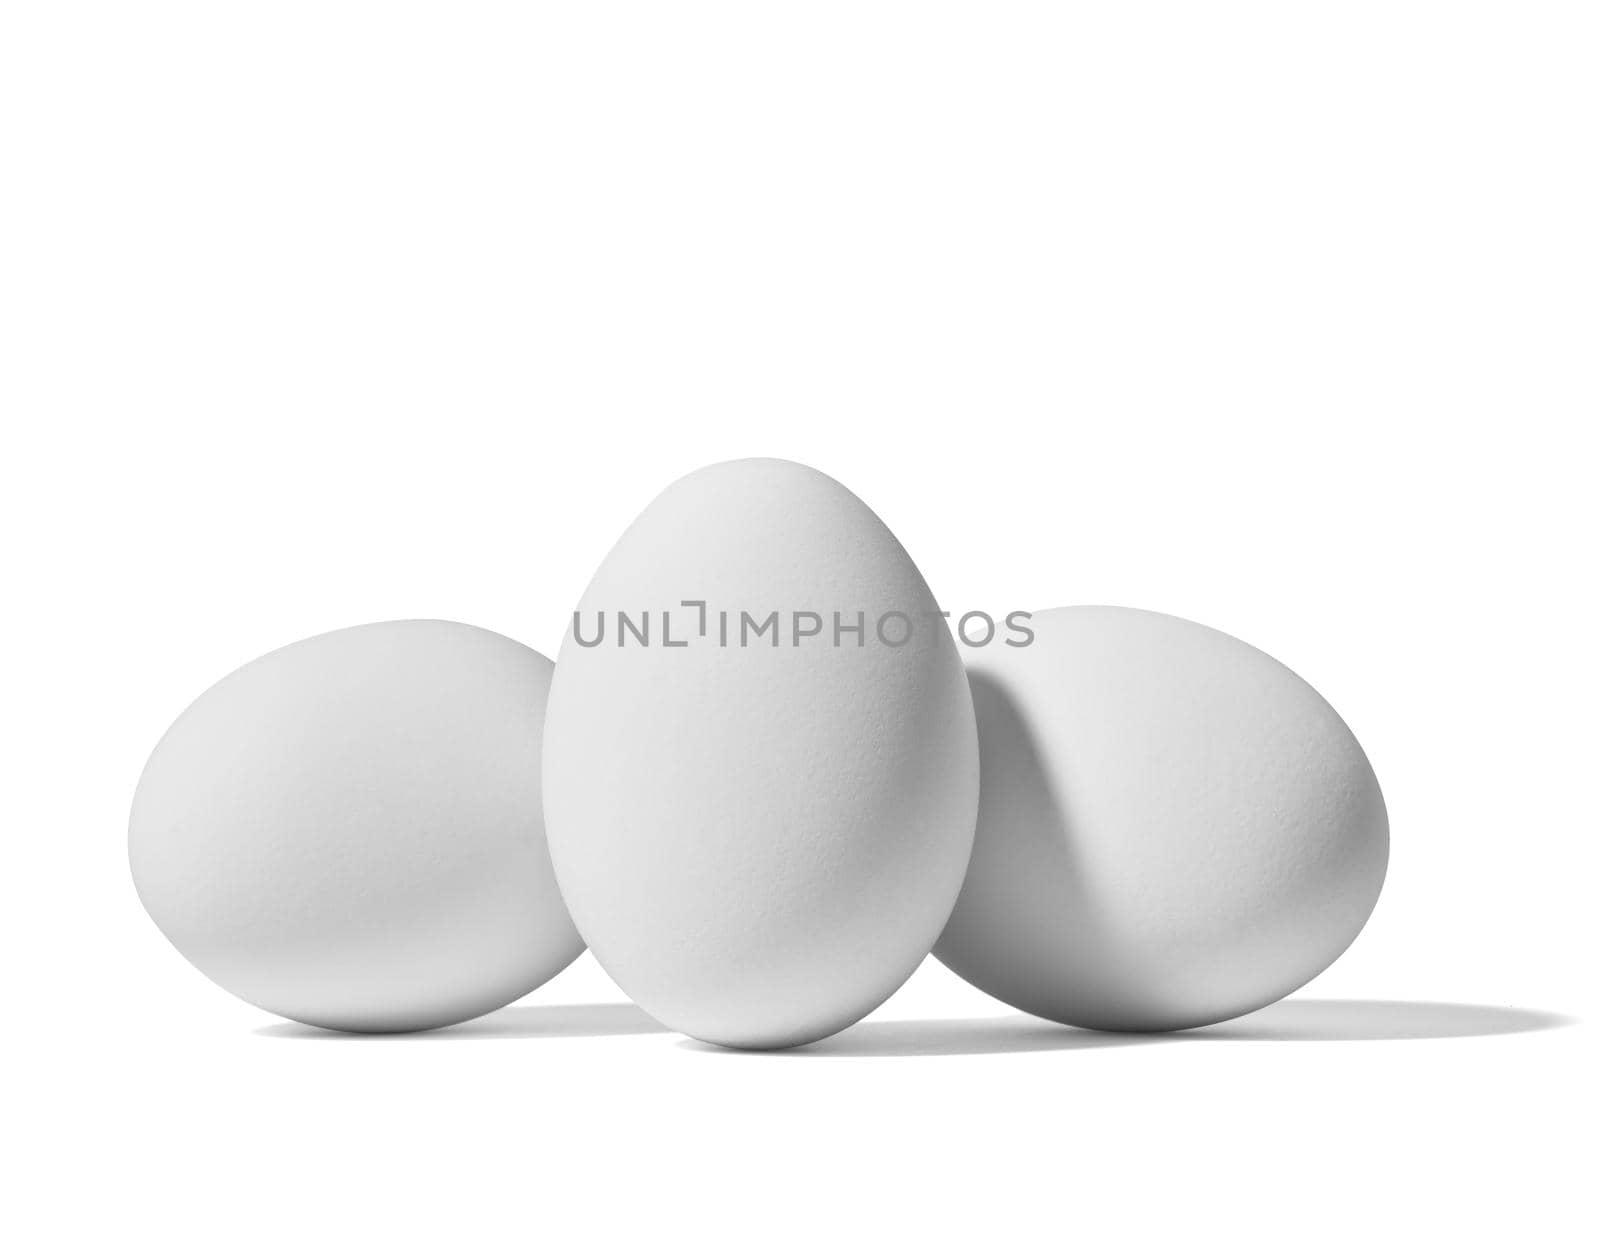 Close up of a white egg on white background